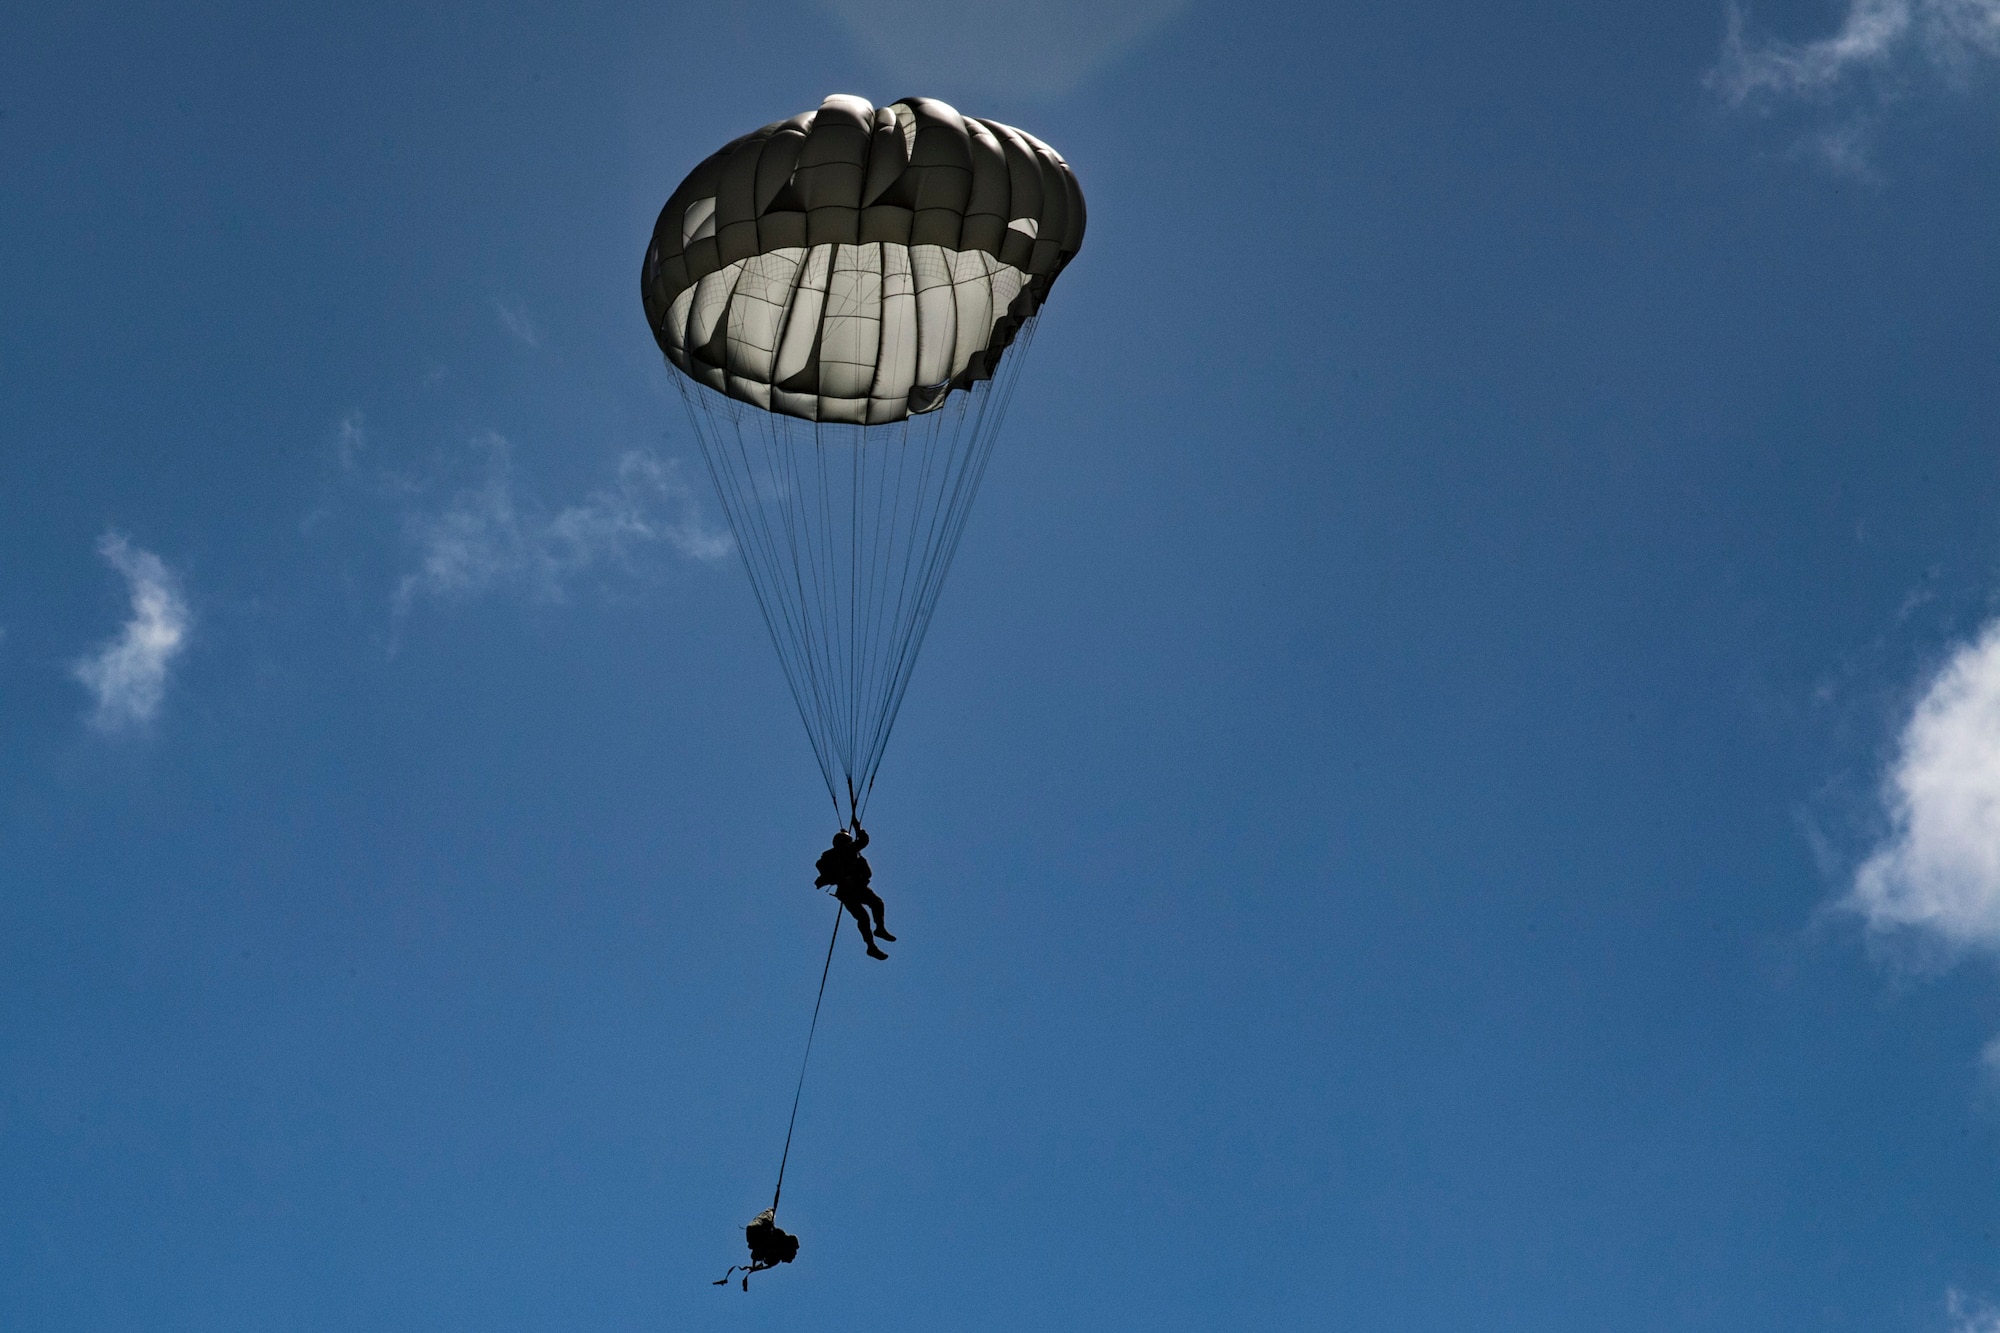 A member of the 820th Base Defense Group descends during a static-line jump, Oct. 3, 2017, at the Lee Fulp drop zone in Tifton, Ga. During a static-line jump, the jumper is attached to the aircraft via the ‘static-line’, which automatically deploys the jumpers’ parachute after they’ve exited the aircraft.(U.S. Air Force photo by Airman 1st Class Daniel Snider)